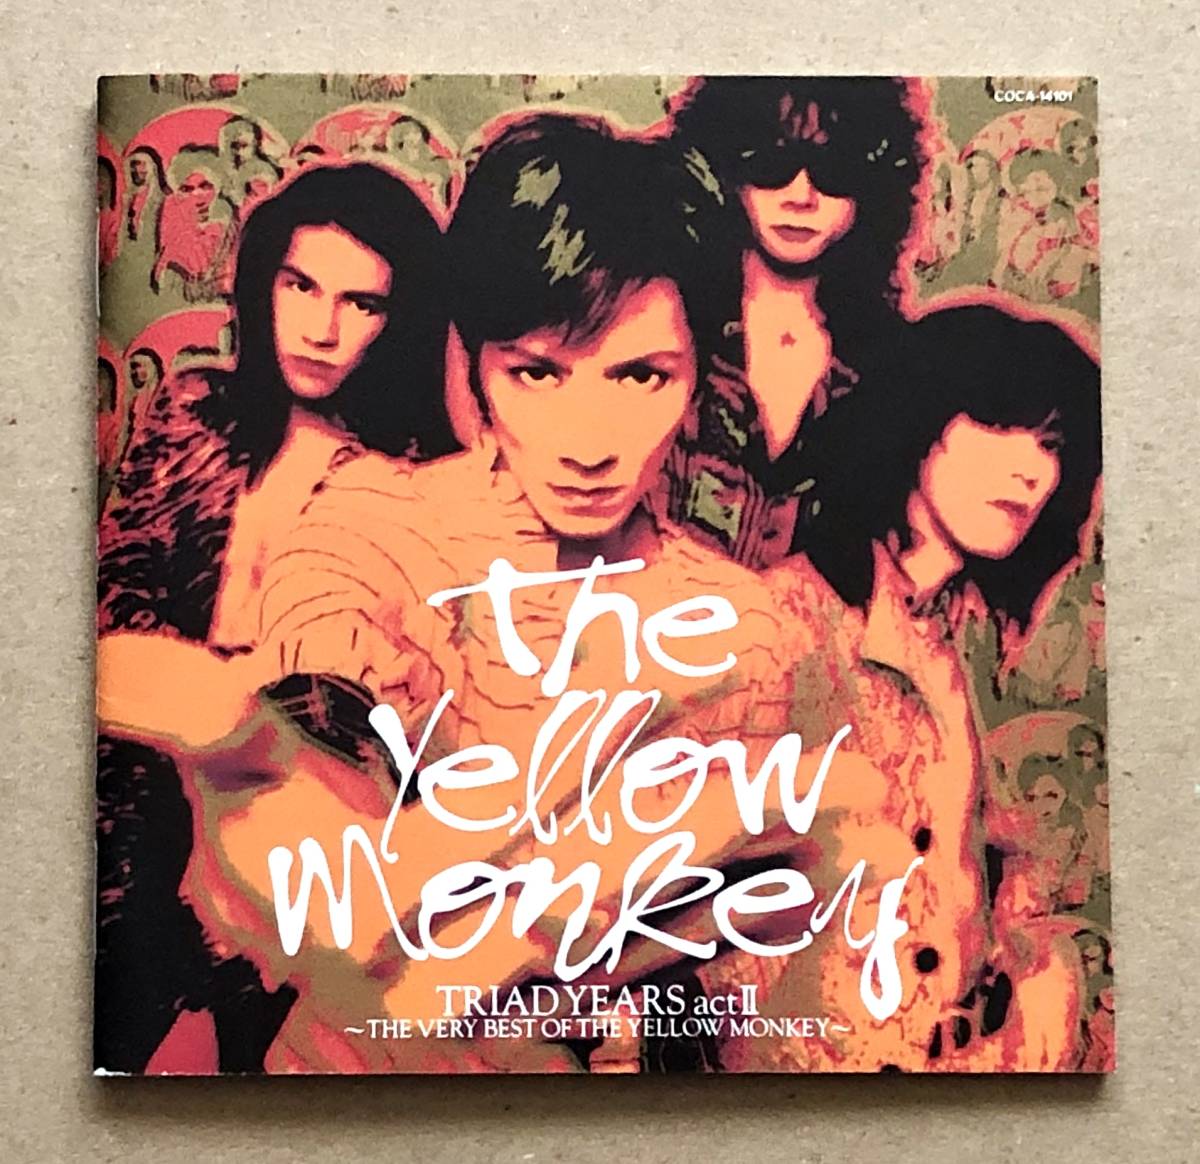 [CD] ザ・イエロー・モンキー / TRIAD YEARS actⅡ -THE VERY BEST OF THE YELLOW MONKEY- 初回盤　ベスト・アルバム_画像7